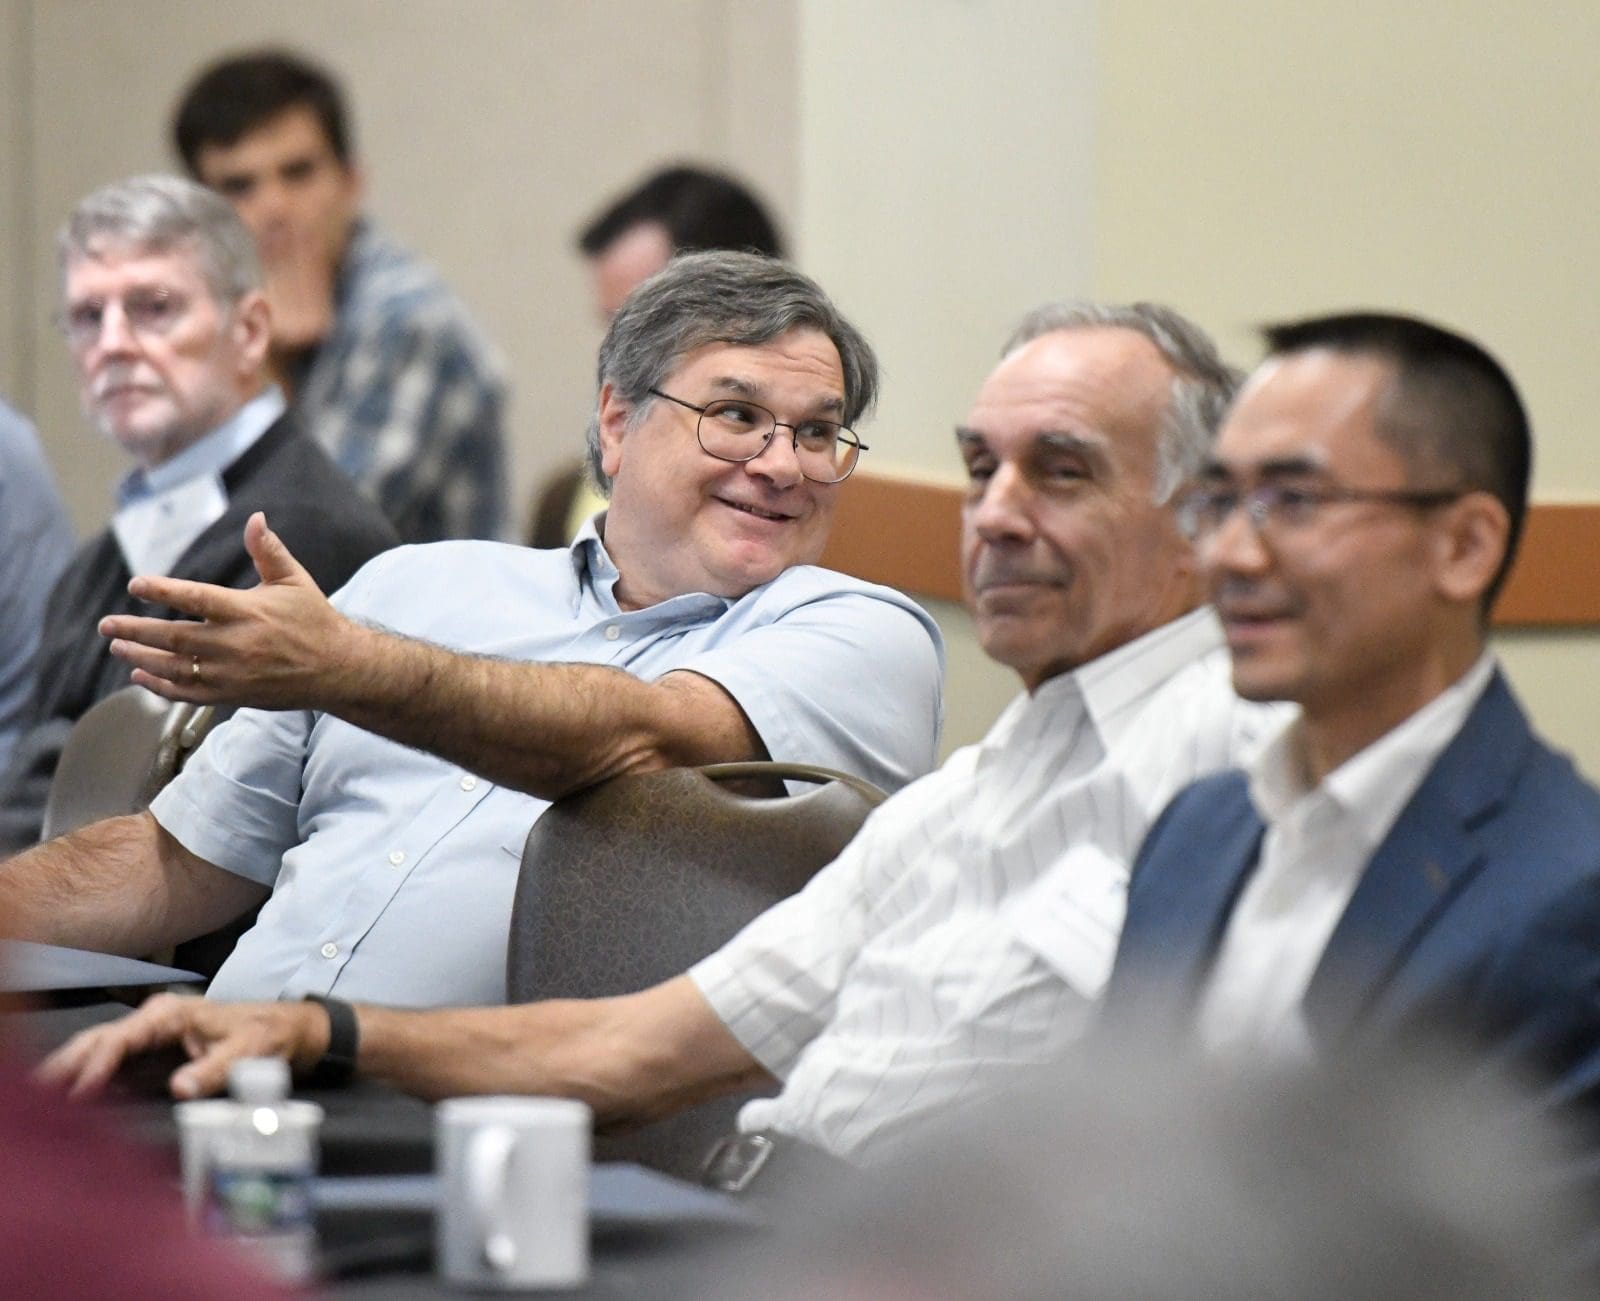 four men at a conference table smiling